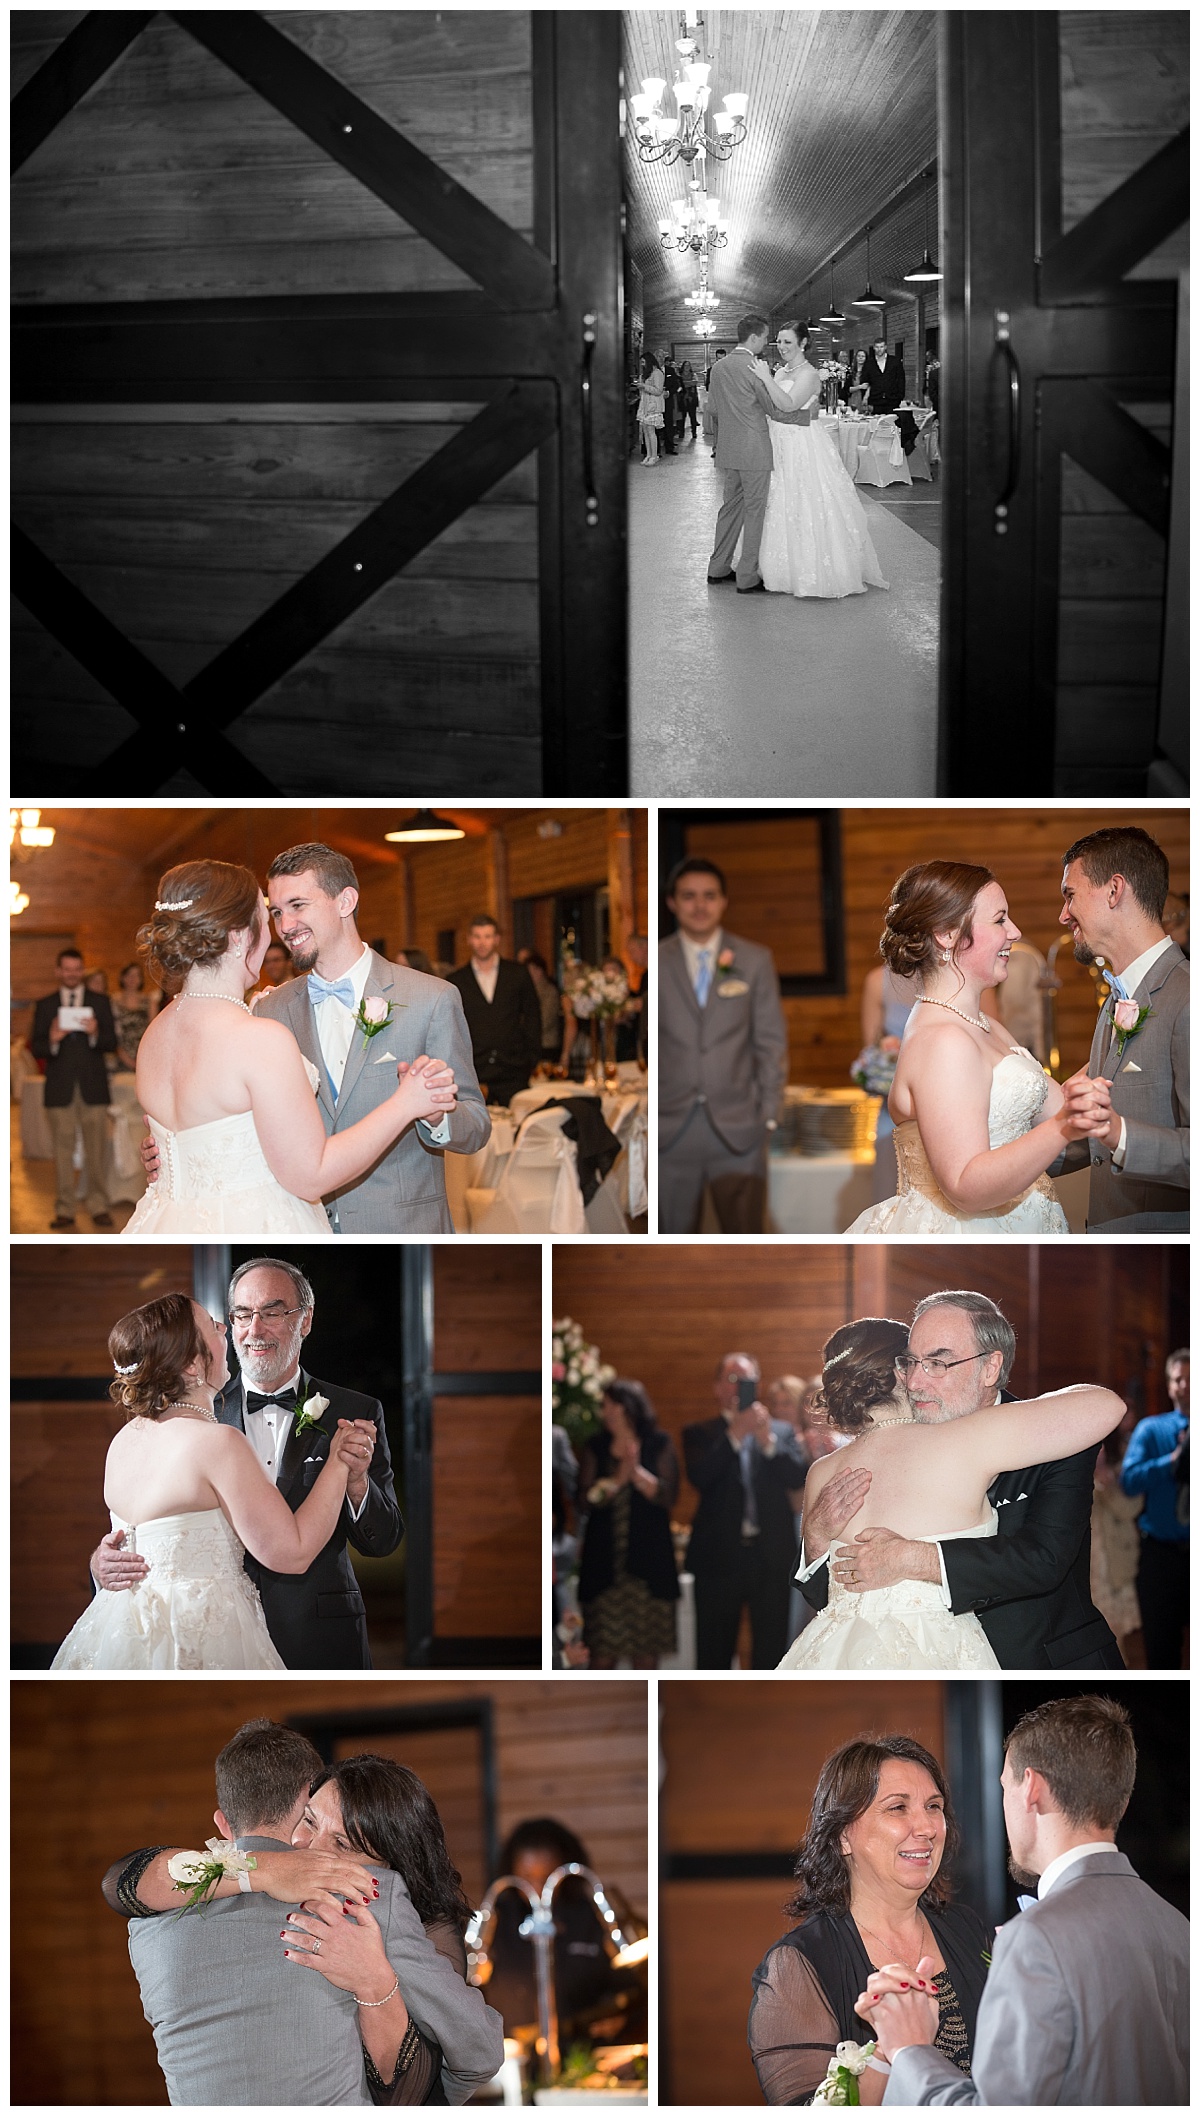 First Dances in the barn